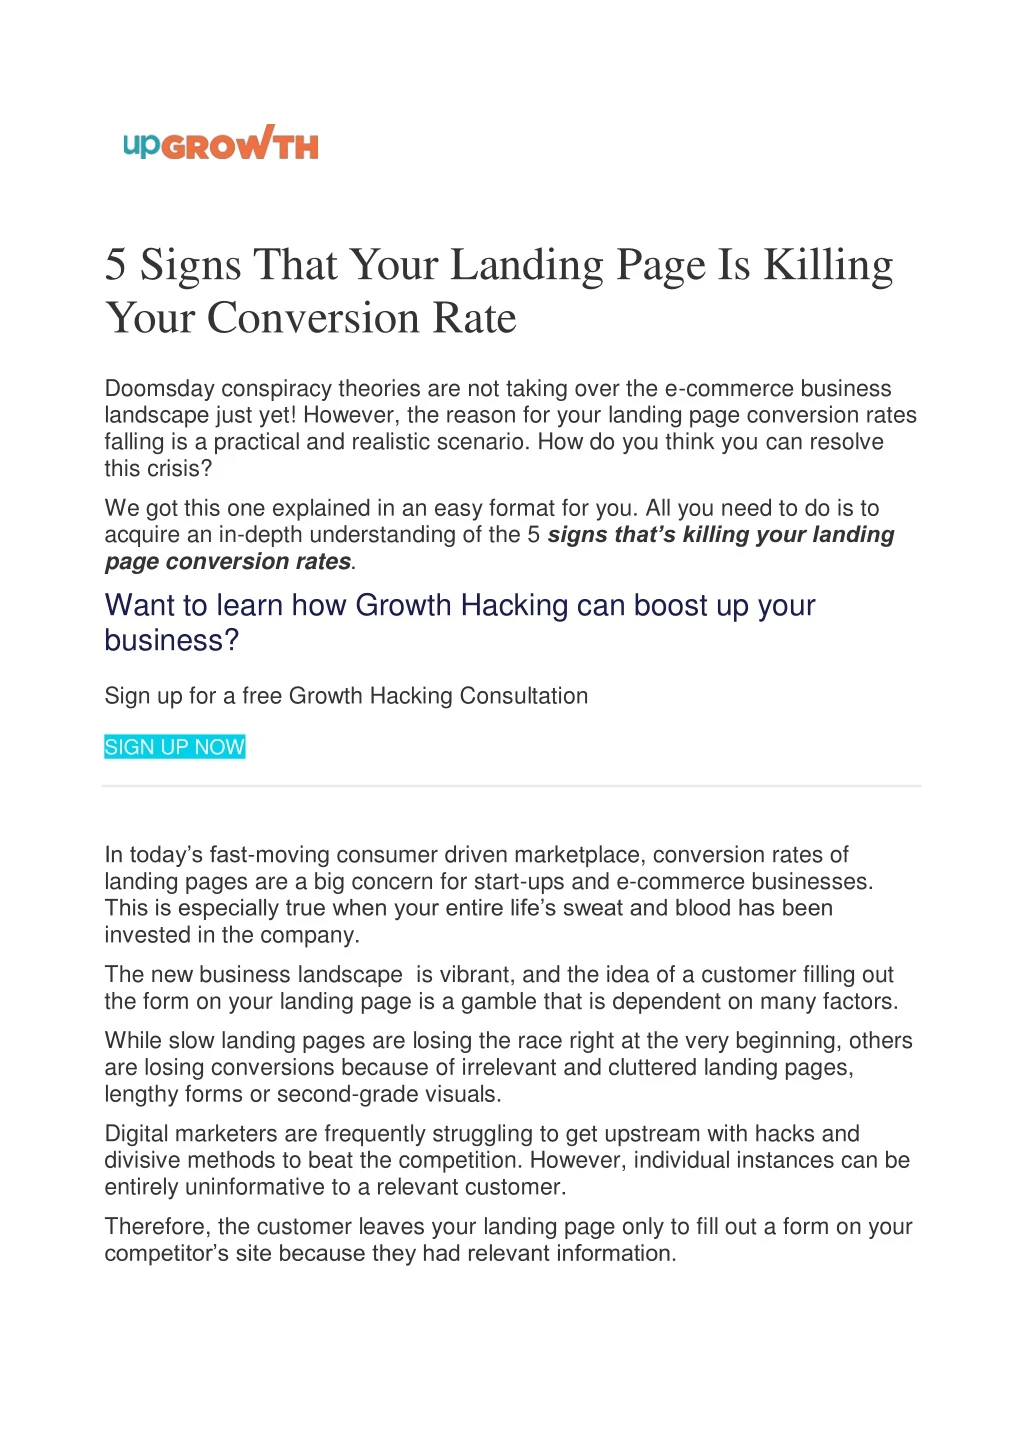 5 signs that your landing page is killing your